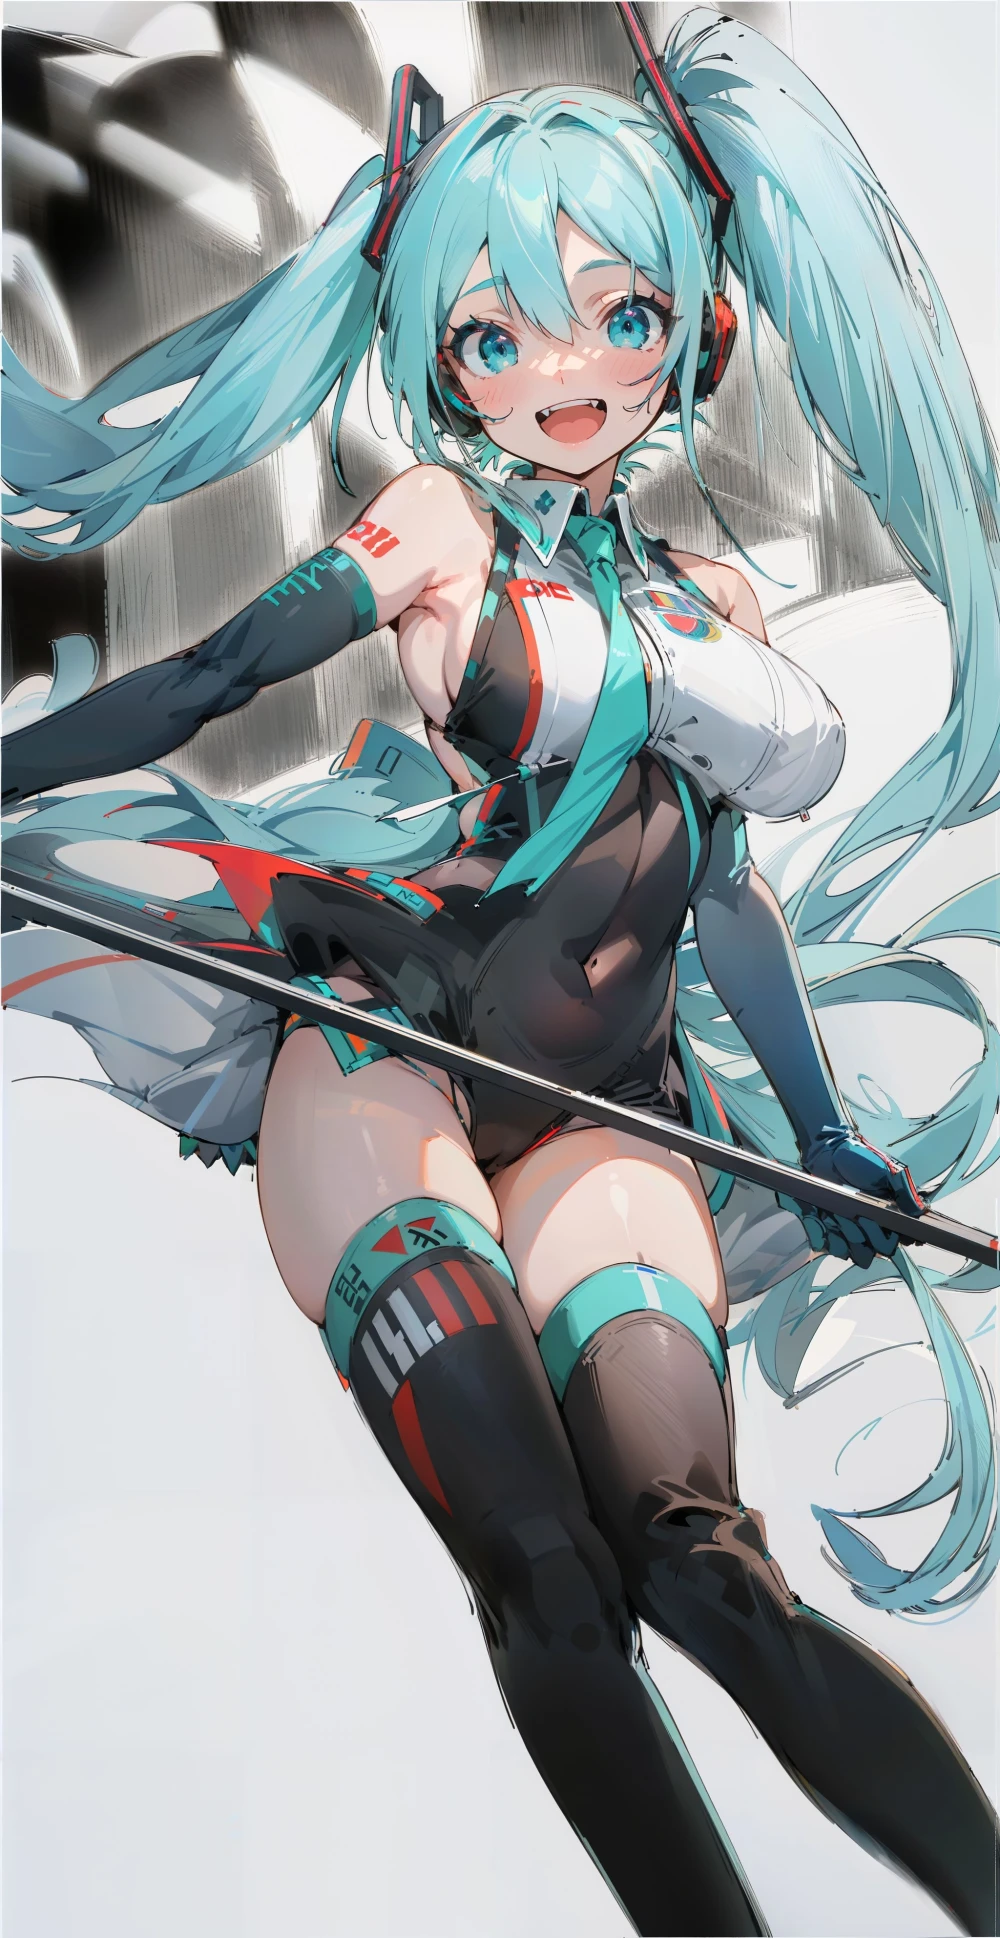 hatsune-miku-anime-style-all-ages-2-25